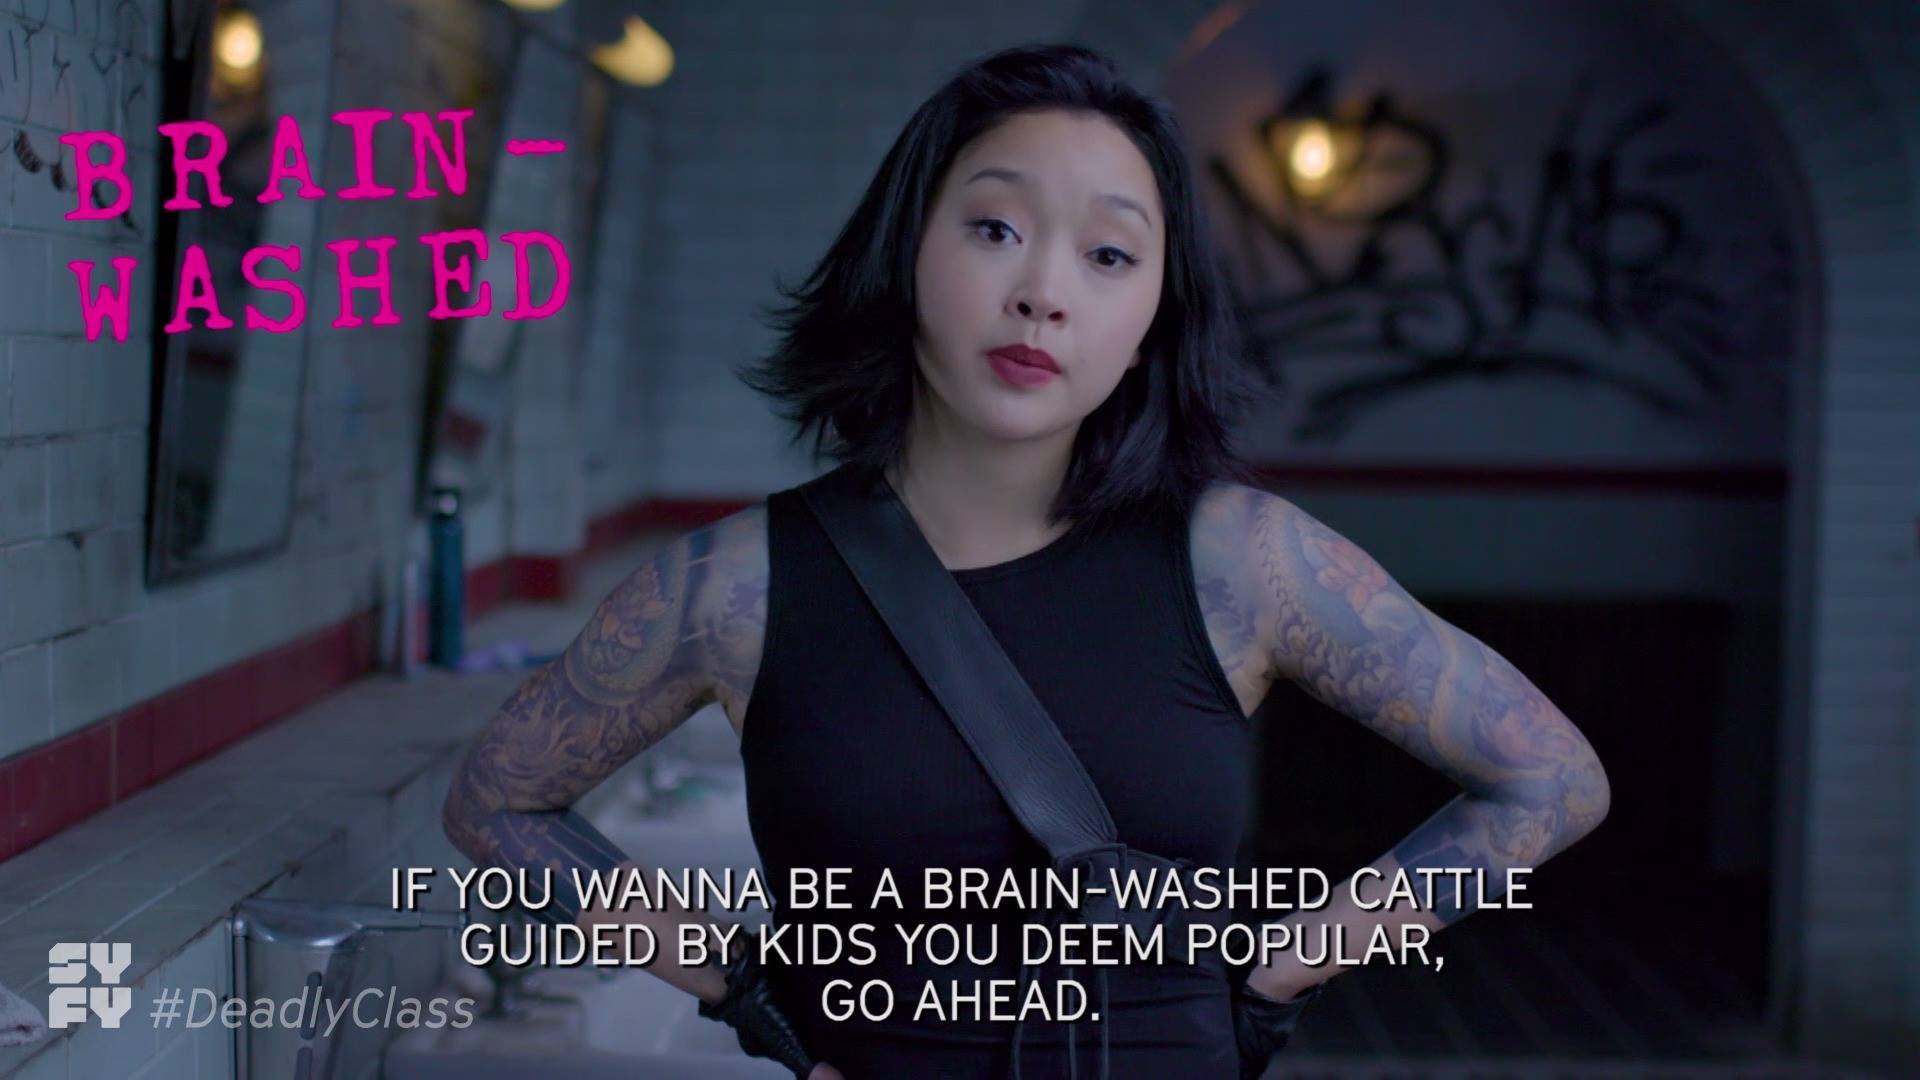 Deadly Class Killer Advice 2 When it comes to fitting in at